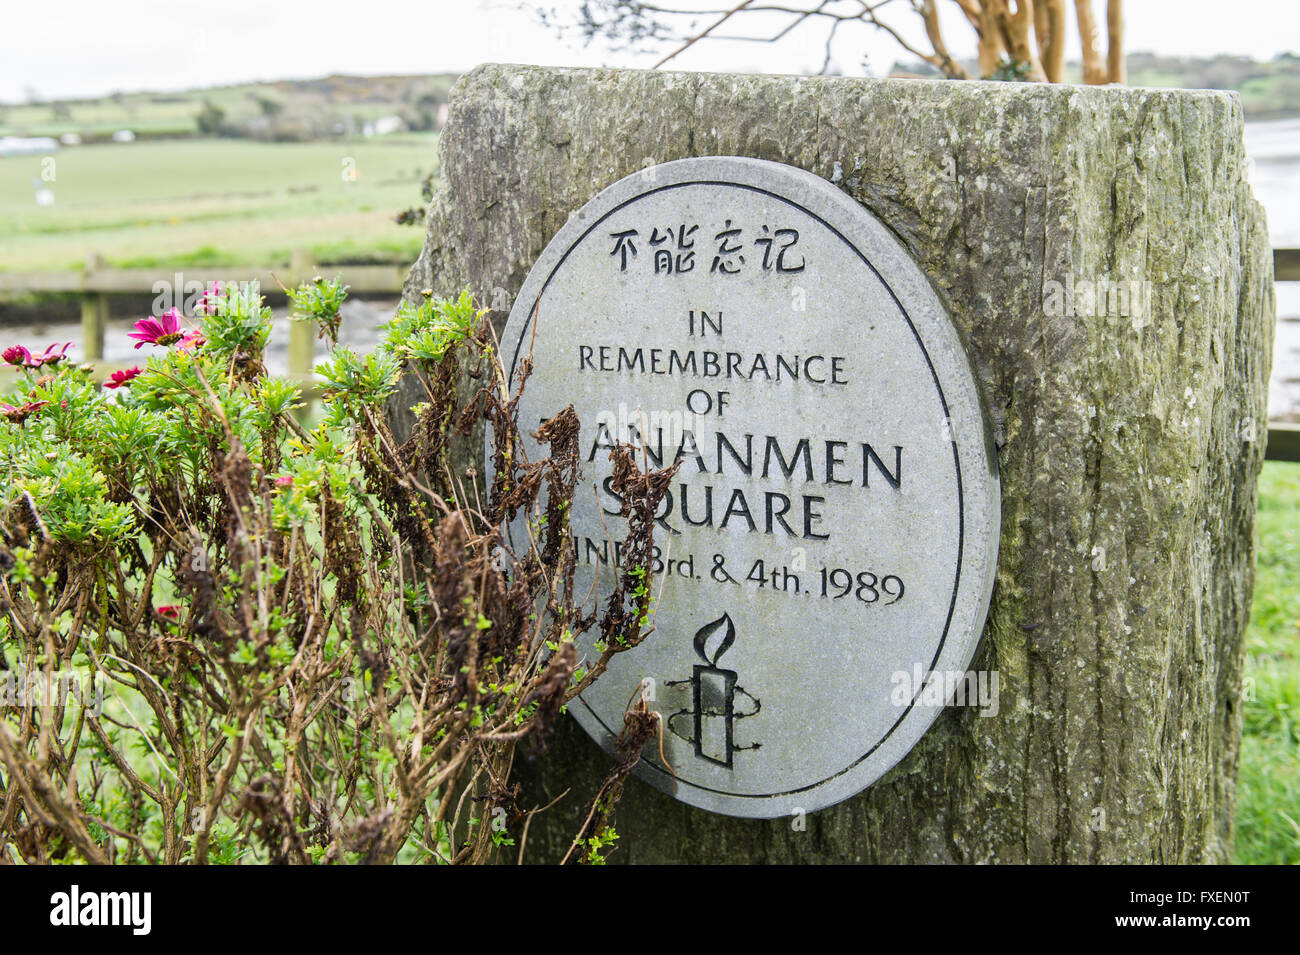 A plaque in Clonakilty, West Cork, Ireland, commemorating the events in Tiananmen Square, Beijing, China in 1989. Stock Photo